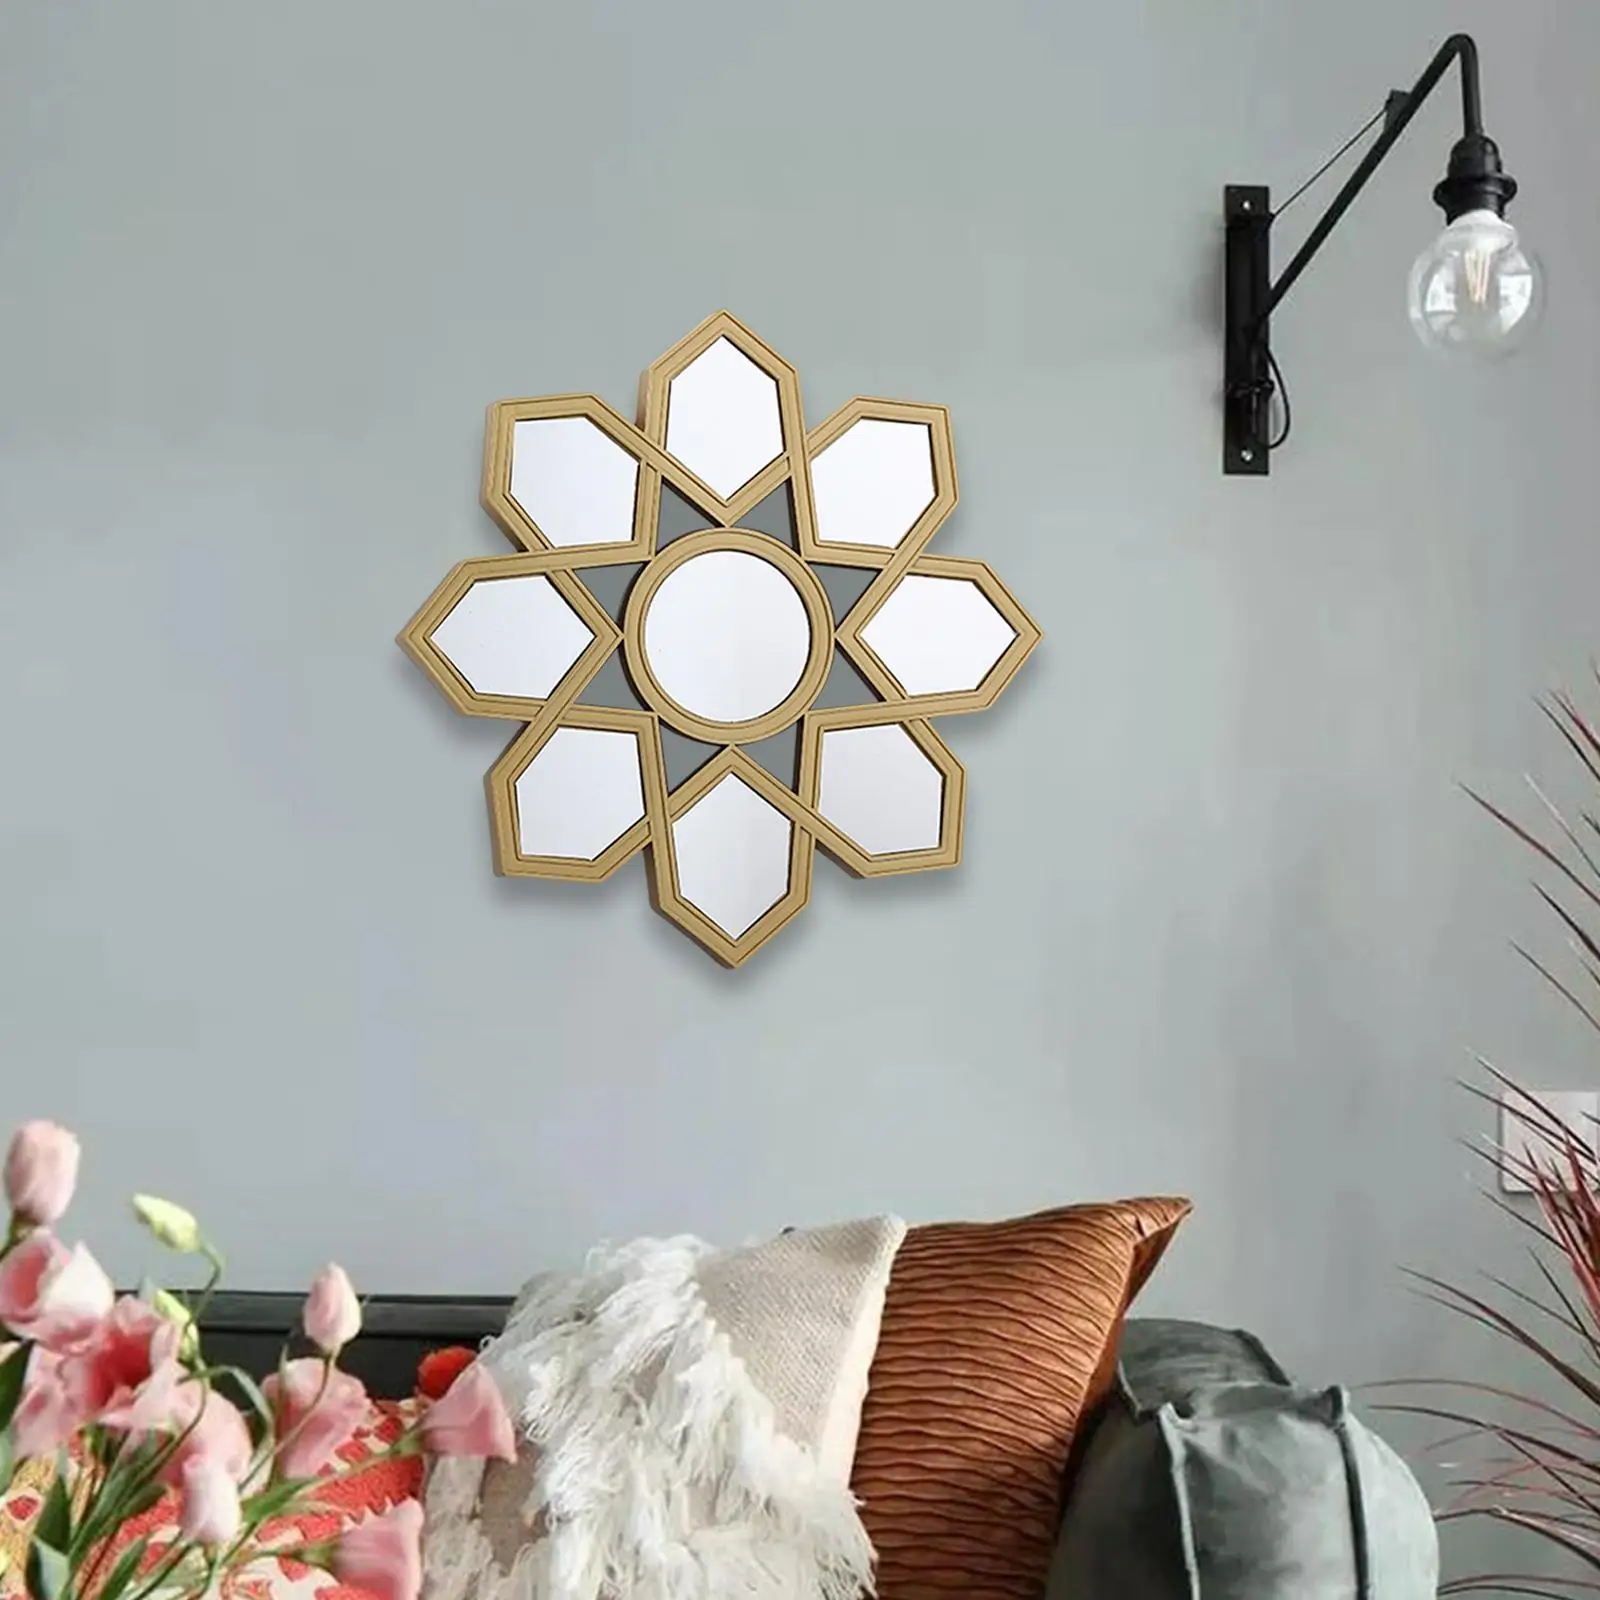 Wall Mirror Photo Props Decorative Circle Mirror 25cm Round Makeup Mirror for Hall Hotel Room Bedroom Decoration